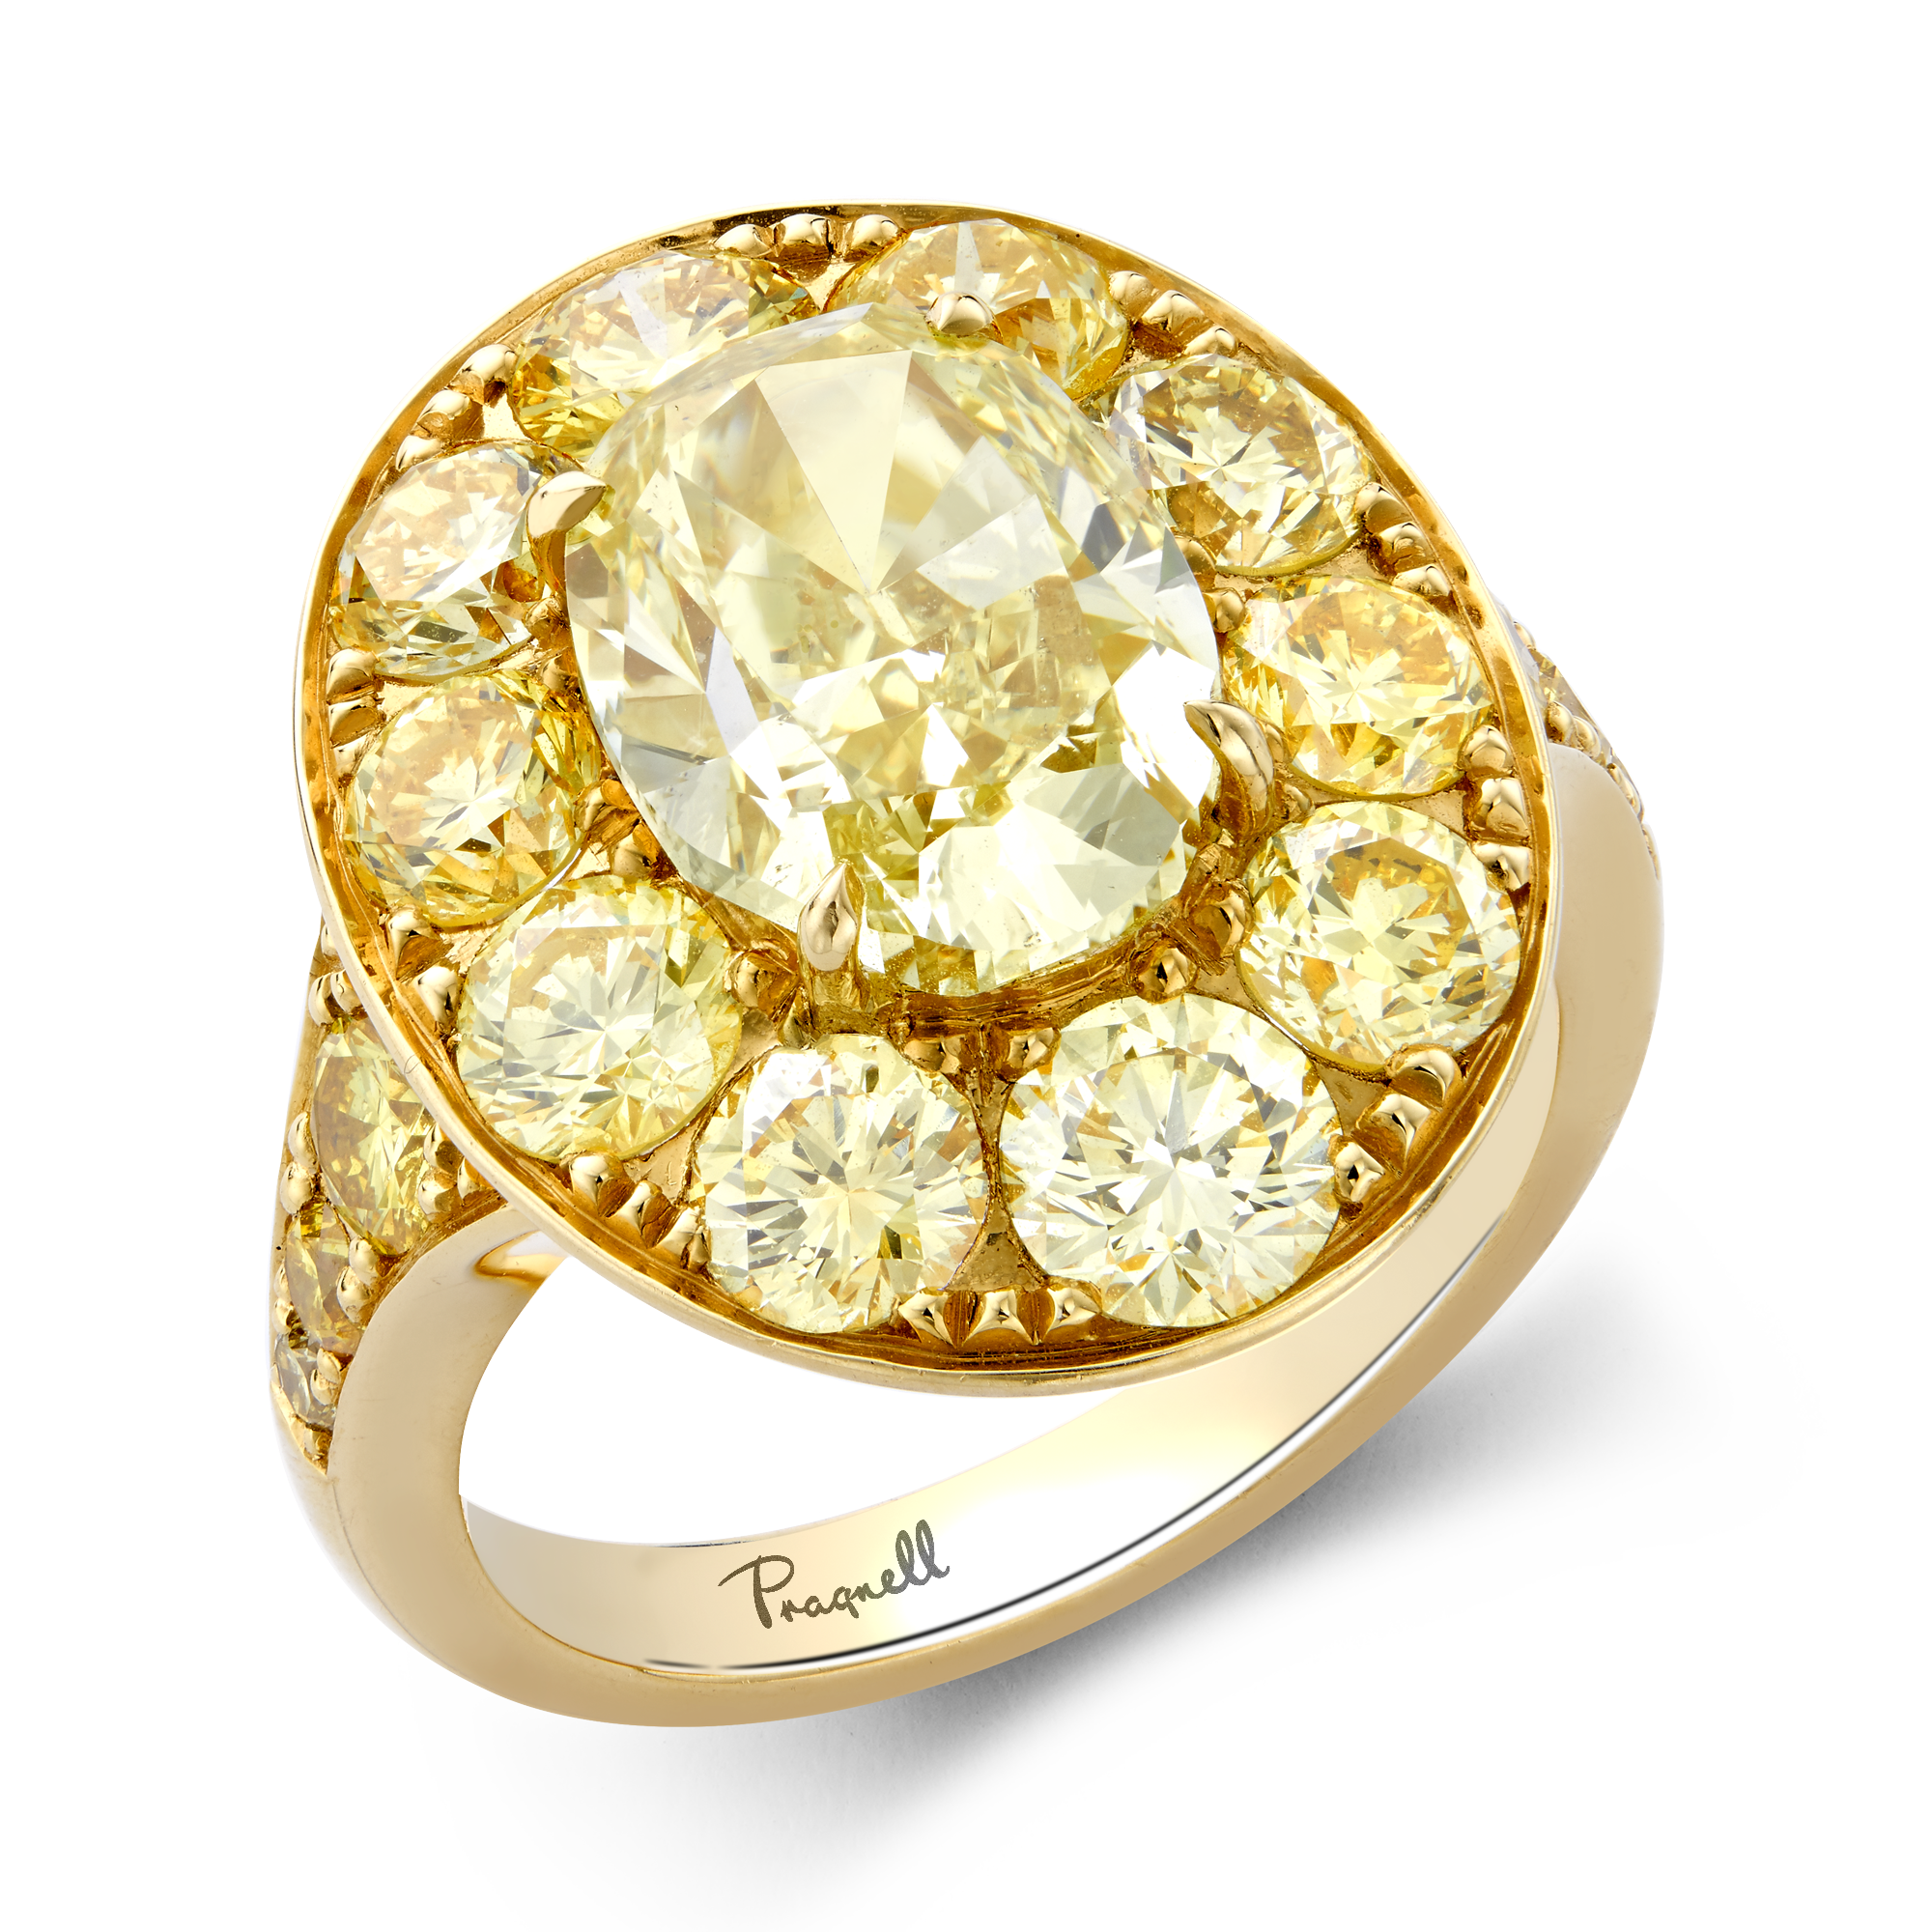 Masterpiece 3.47ct Fancy Vivid Yellow Diamond Cluster Ring Oval Cut, Claw Set_1